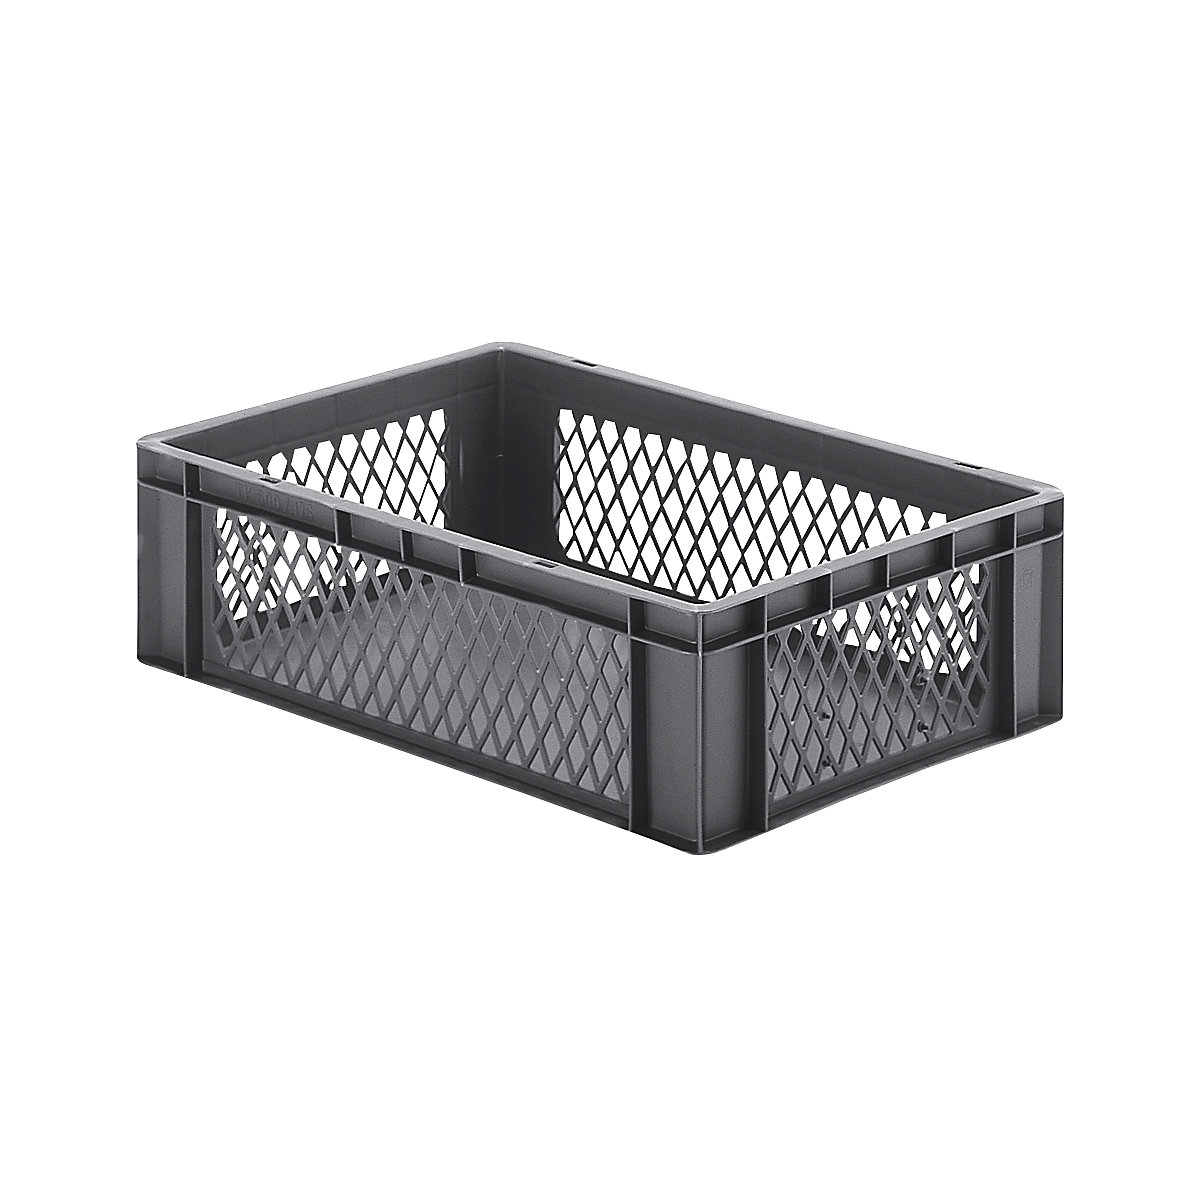 Euro stacking container, perforated walls, closed base, LxWxH 600 x 400 x 175 mm, grey, pack of 5